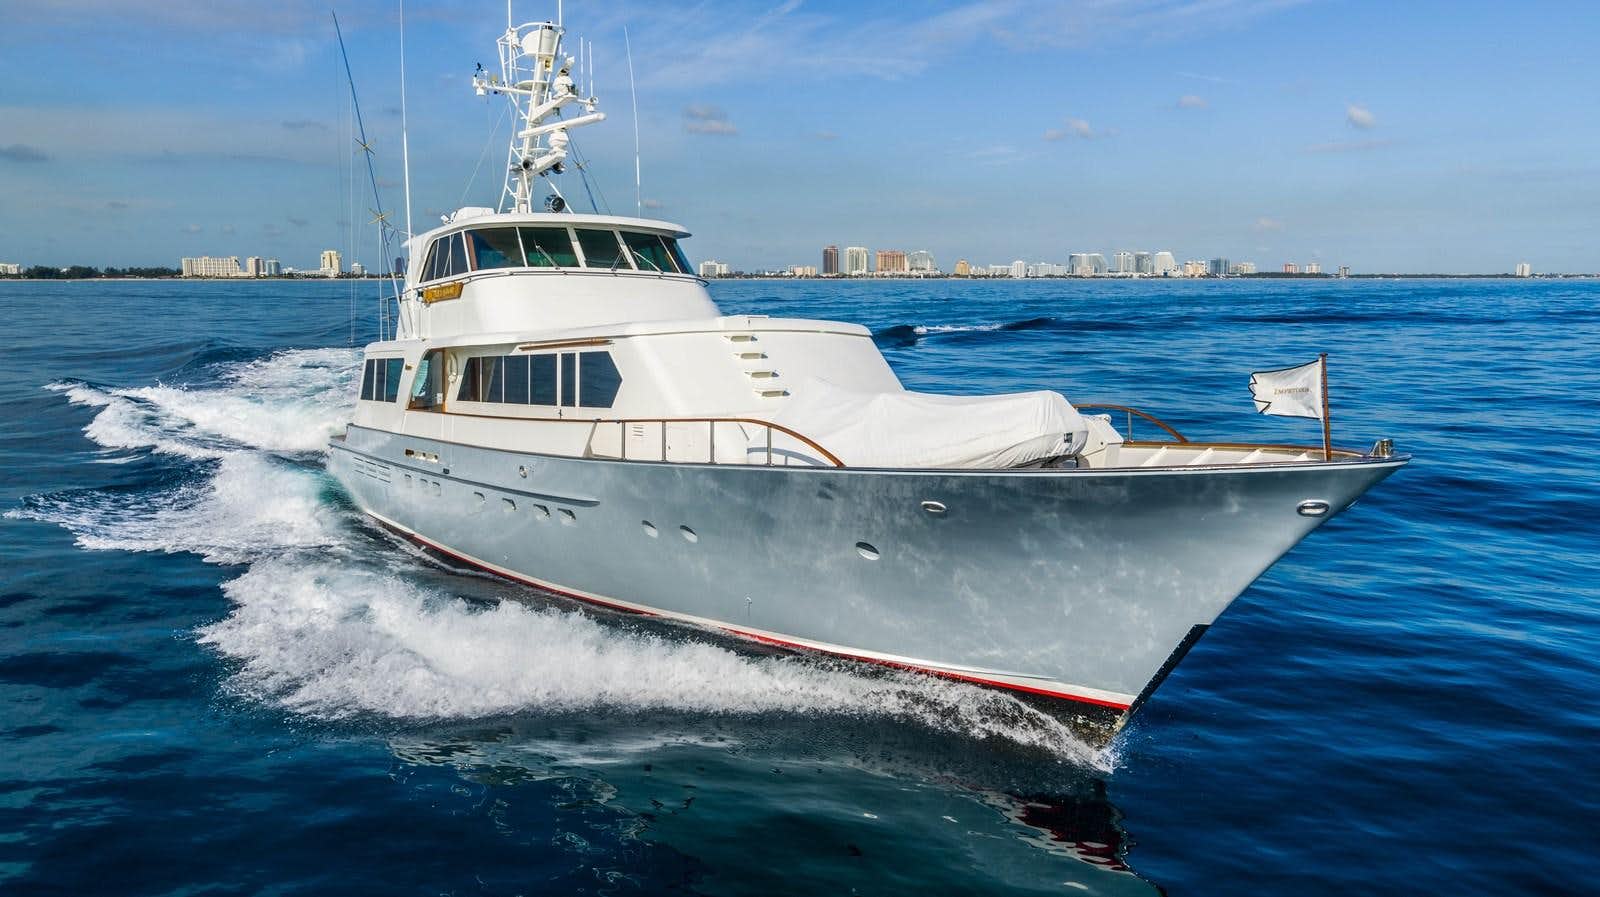 Watch Video for IMPETUOUS Yacht for Sale